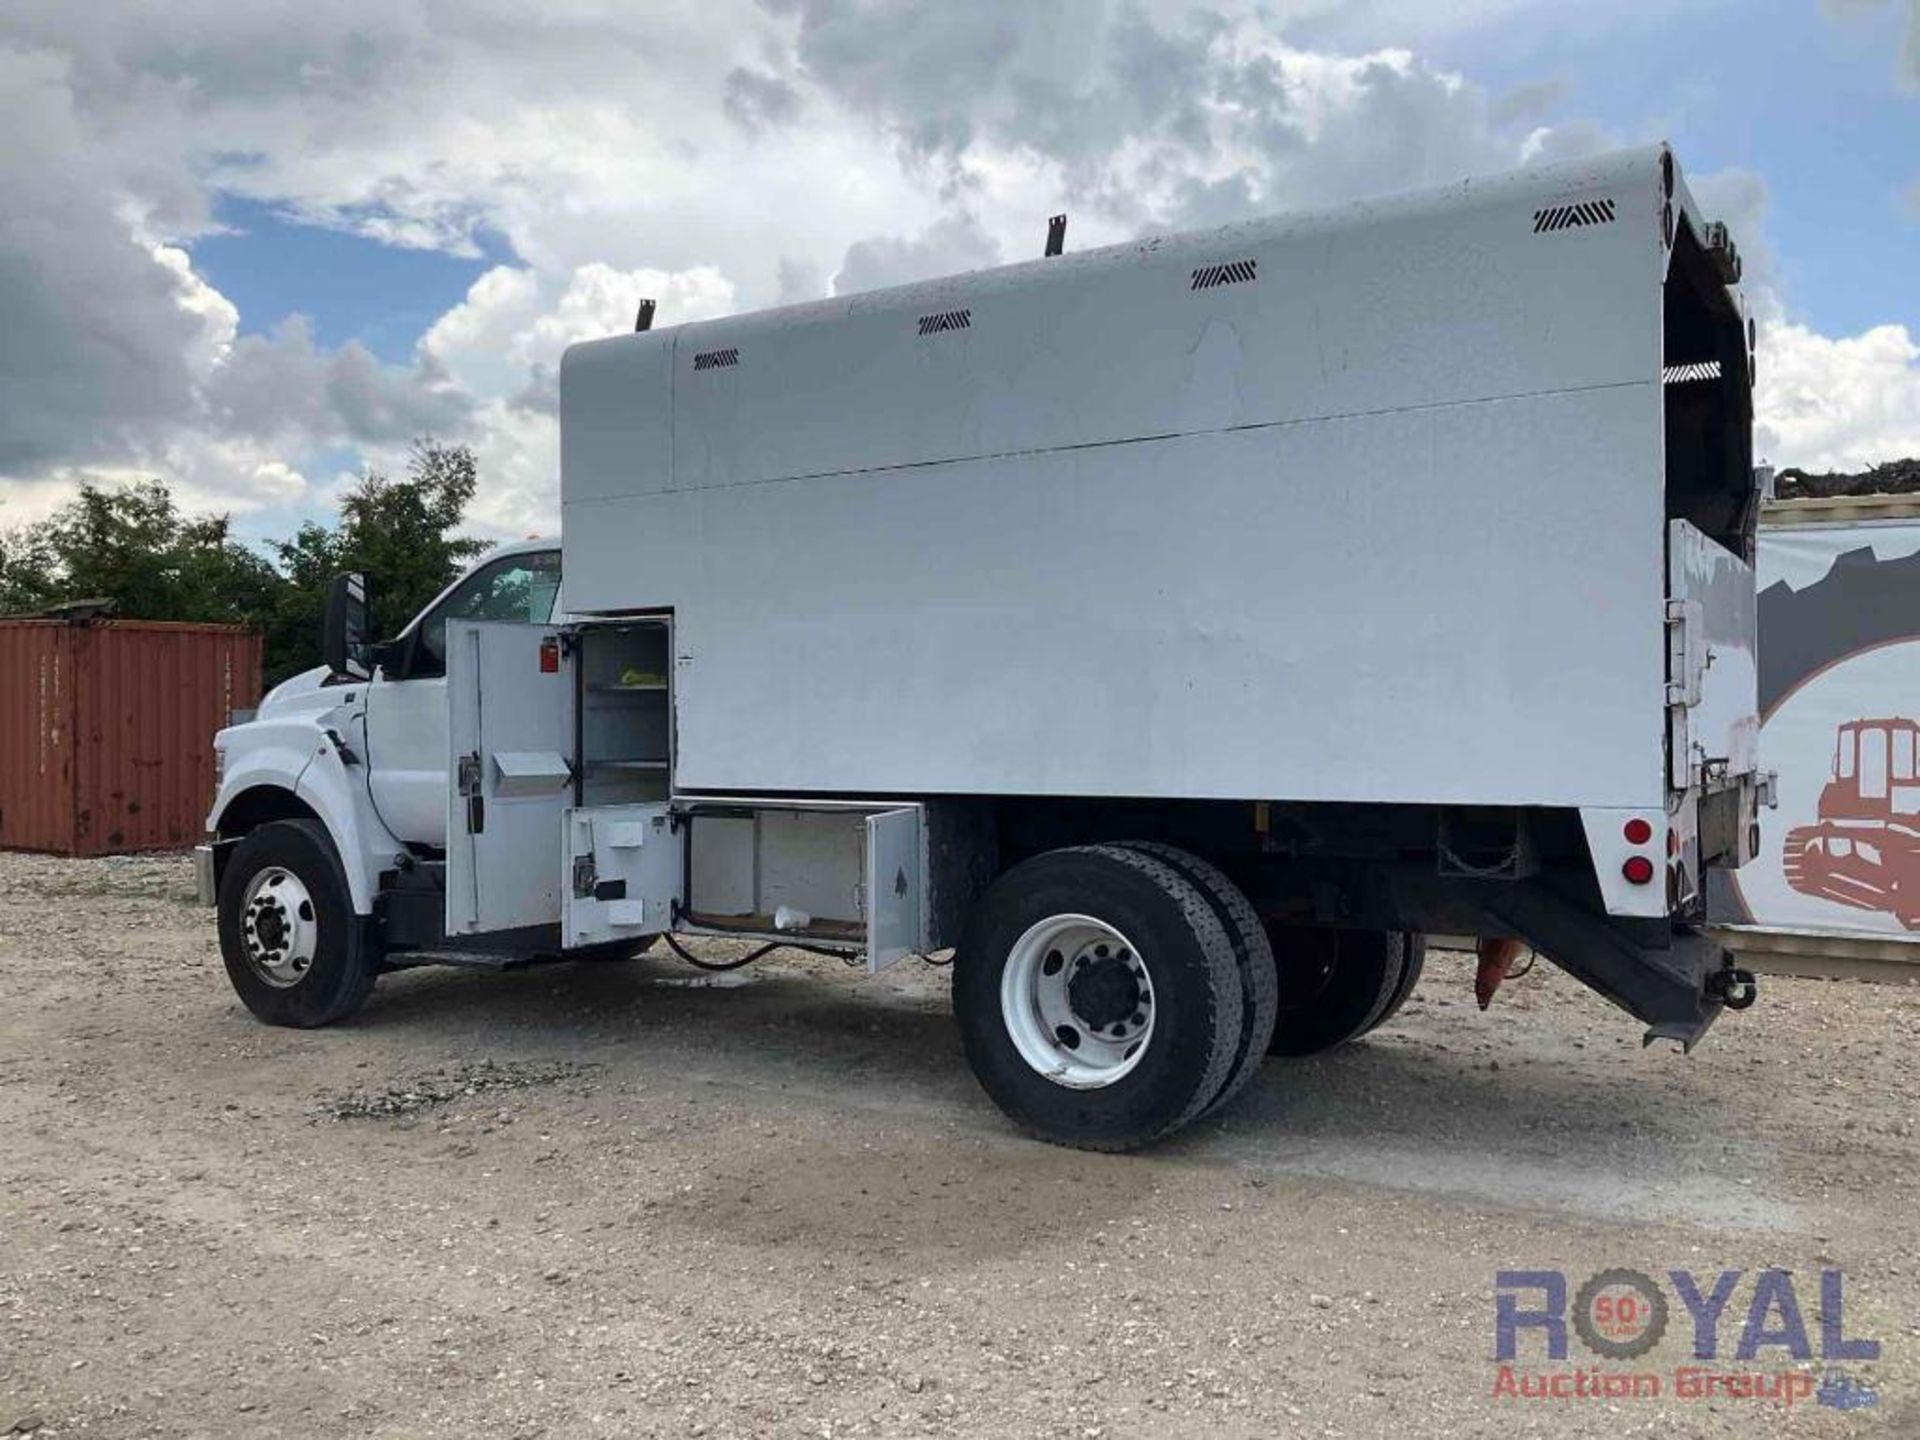 2019 Ford F-750 Forestry Chipper Dump Truck - Image 33 of 53